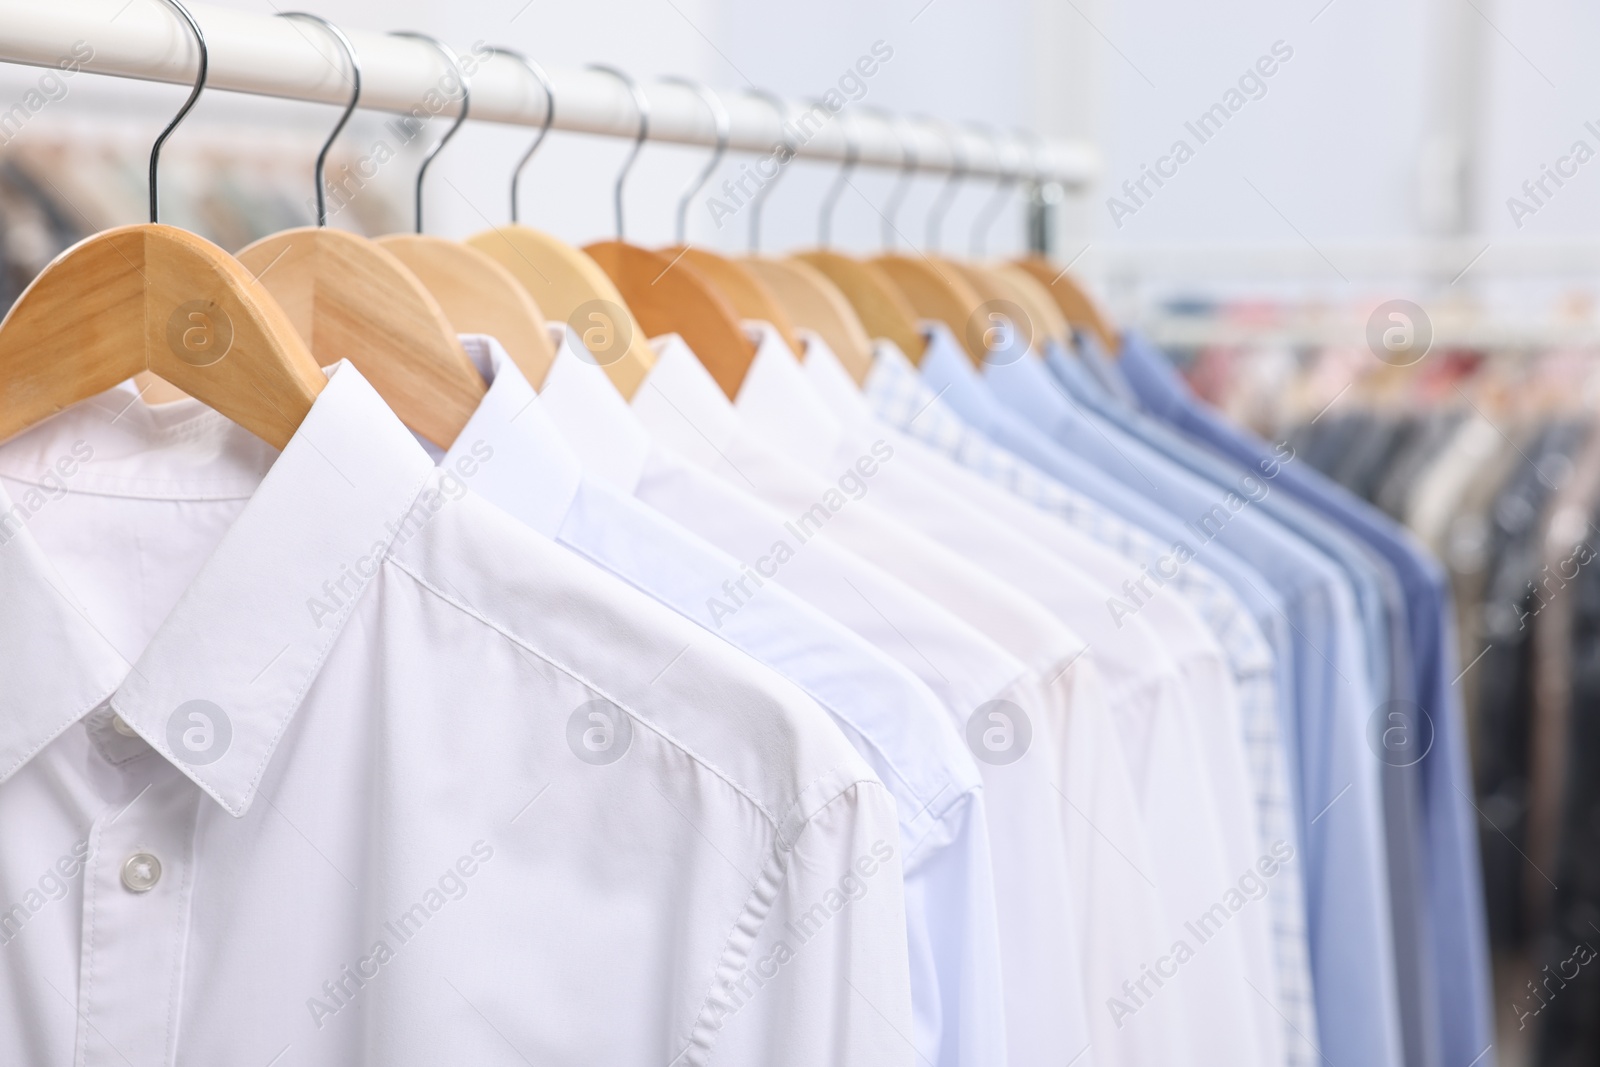 Photo of Dry-cleaning service. Many different clothes hanging on rack indoors, closeup